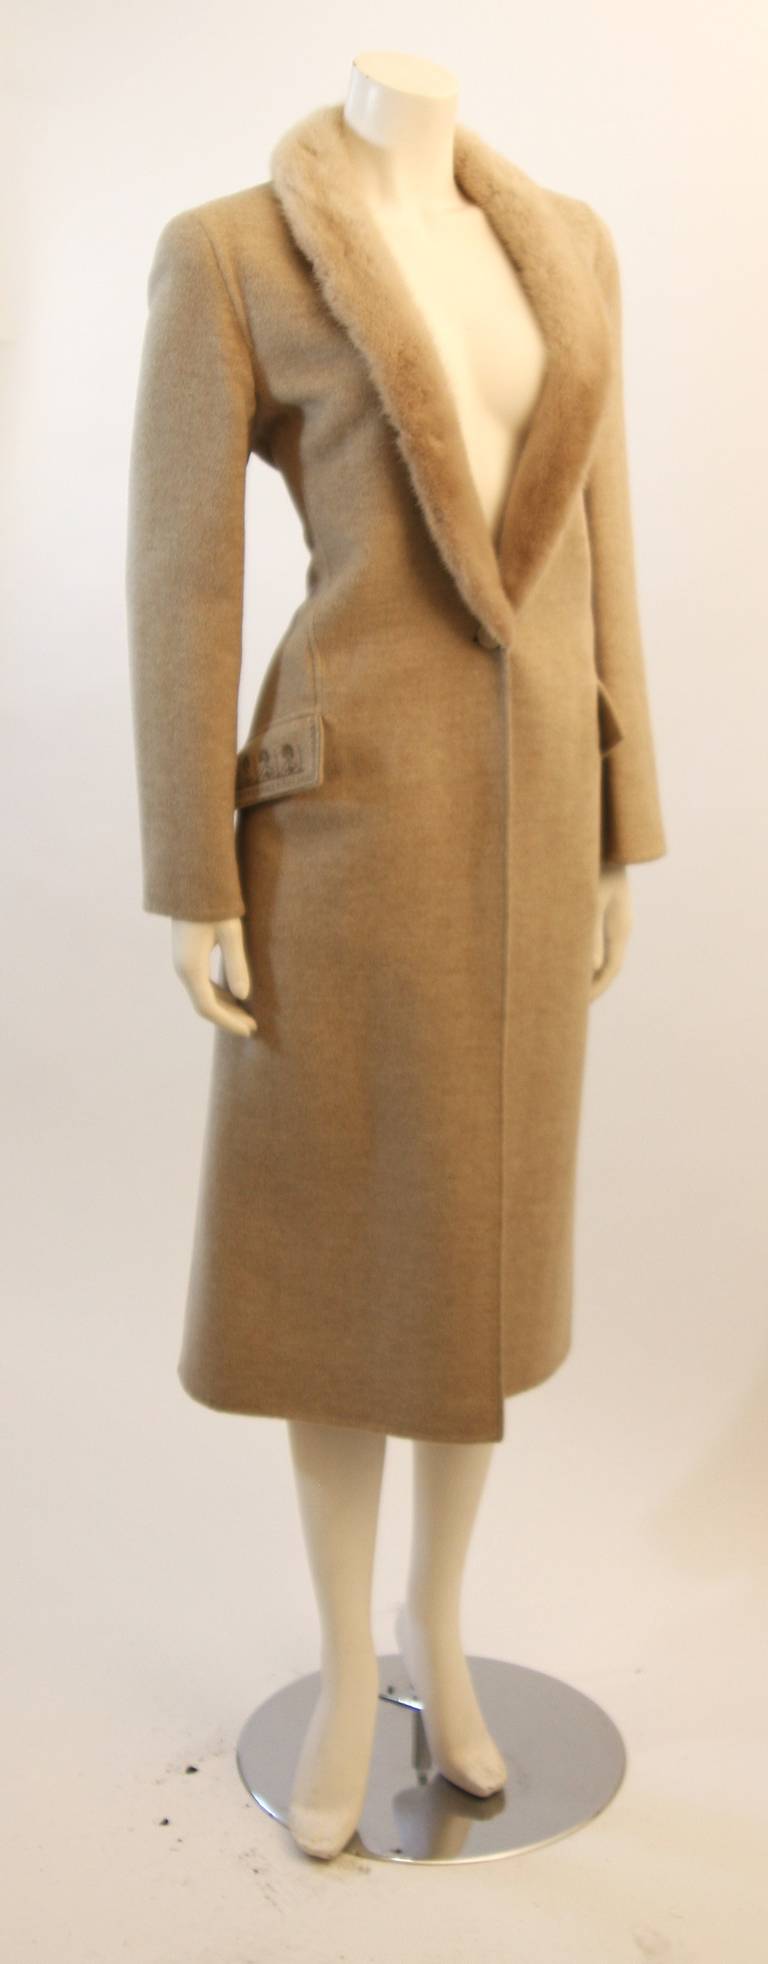 This is a wonderful Valentino coat. The coat is composed of the most supple wool blend and an ultra soft mink collar. It features a brilliant fur trim, two front pockets (unopened), and a center front button fastening. Interior has a striped